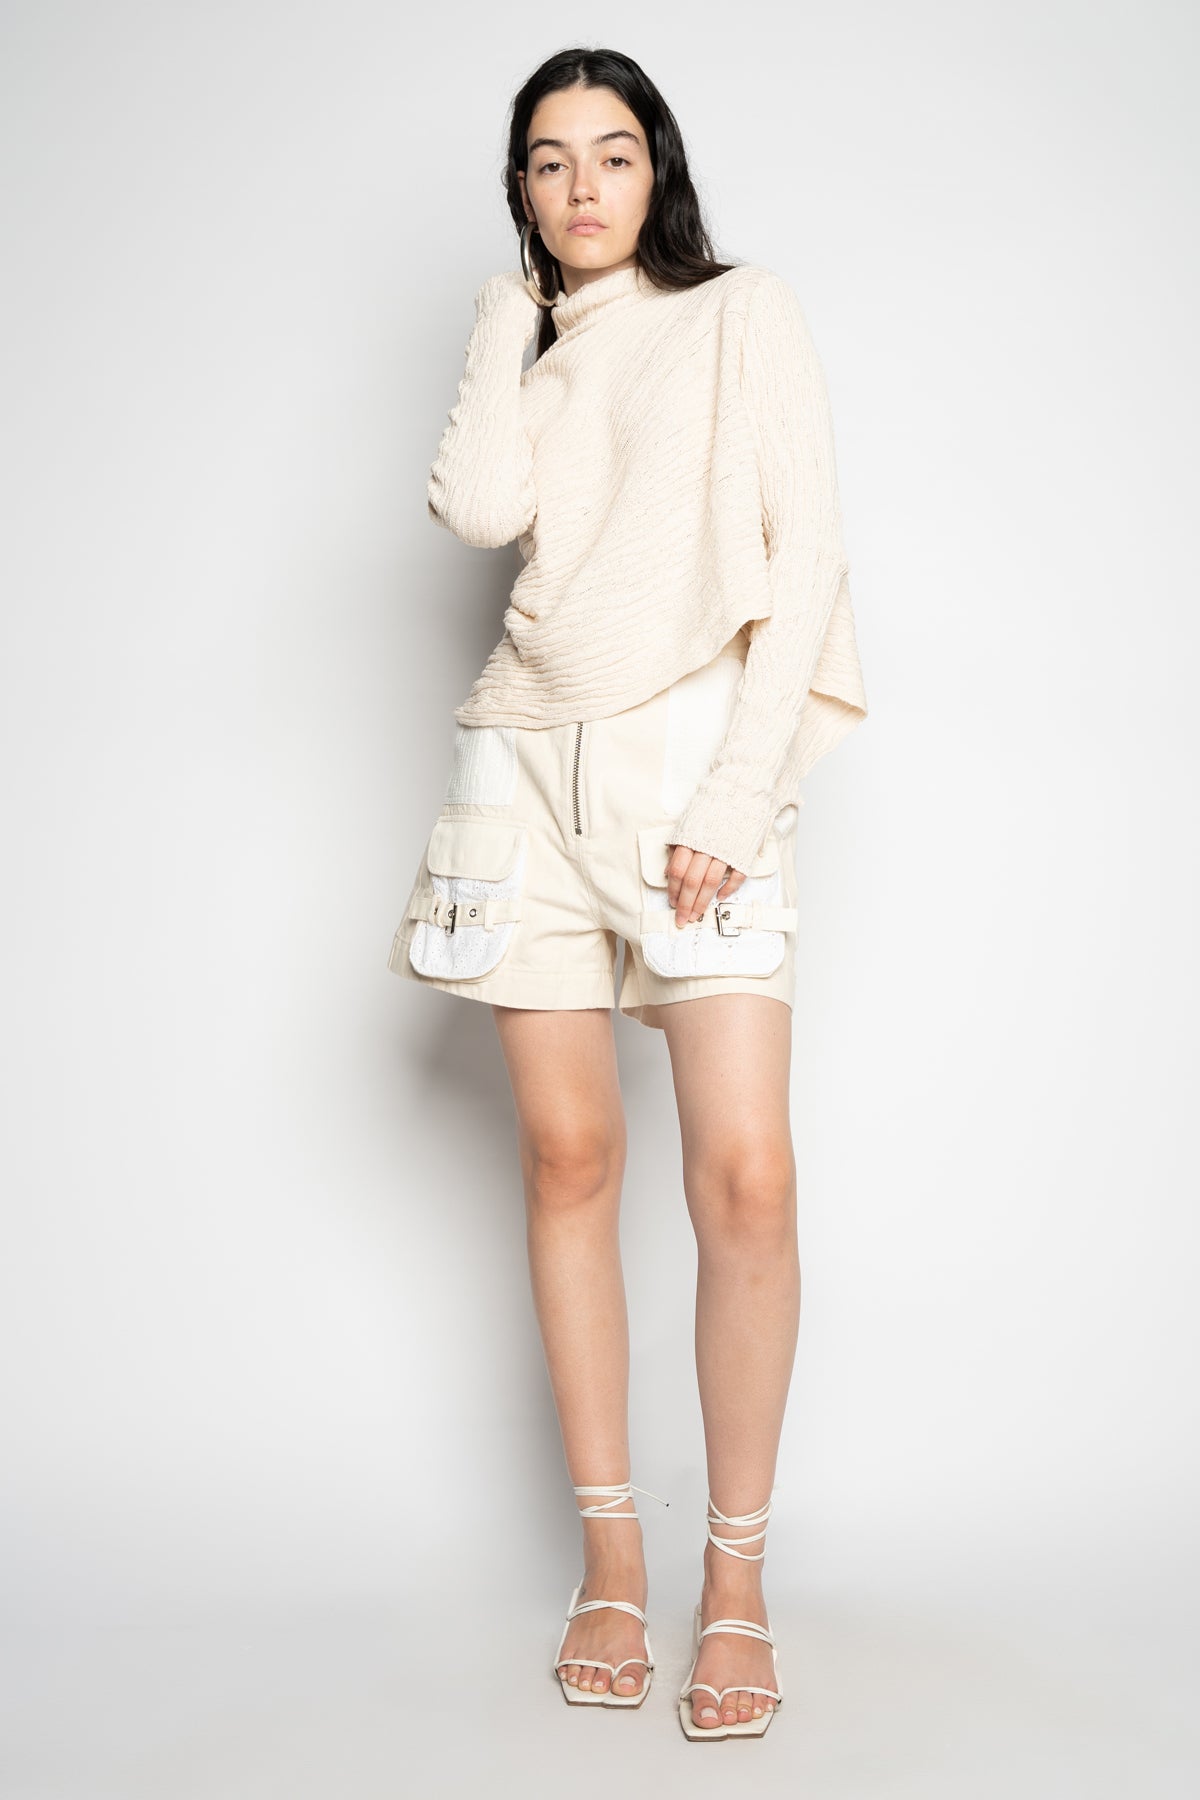 OFF WHITE PATCHWORK SHORTS marques almeida